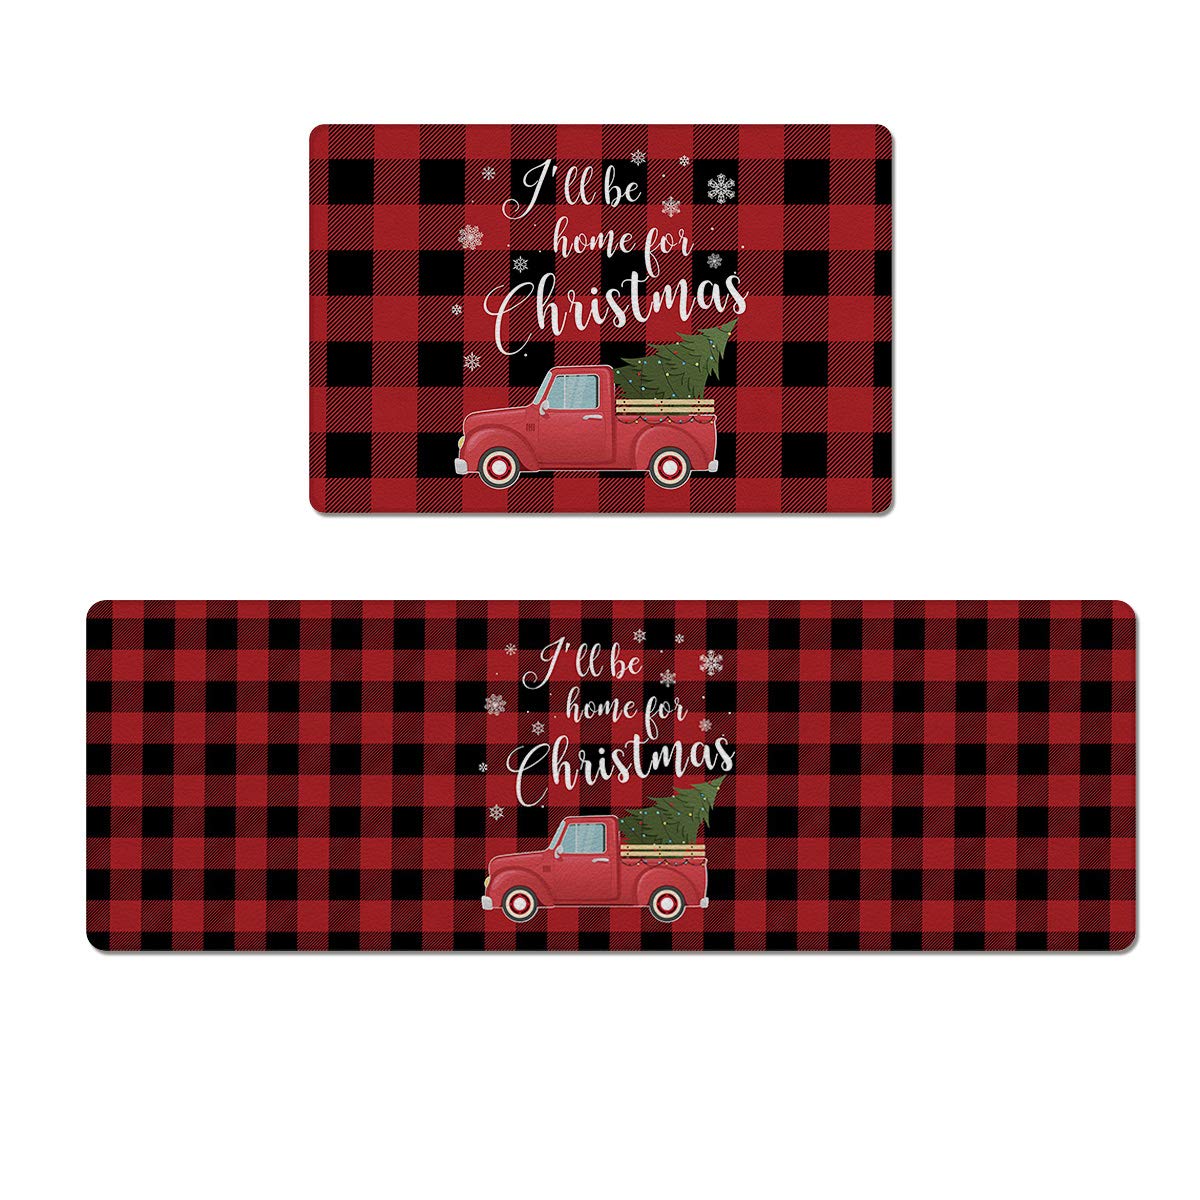 Kitchen Rugs Set Anti-Fatigue Floor Mat Doormats 2 Pcs Waterproof Non-Slip Kitchen Mats and Rugs PVC Standing Mats Runner Carpet, I'll Be Home for Christmas Truck with Xmas Tree Plaid 18"x30"+18"x59"